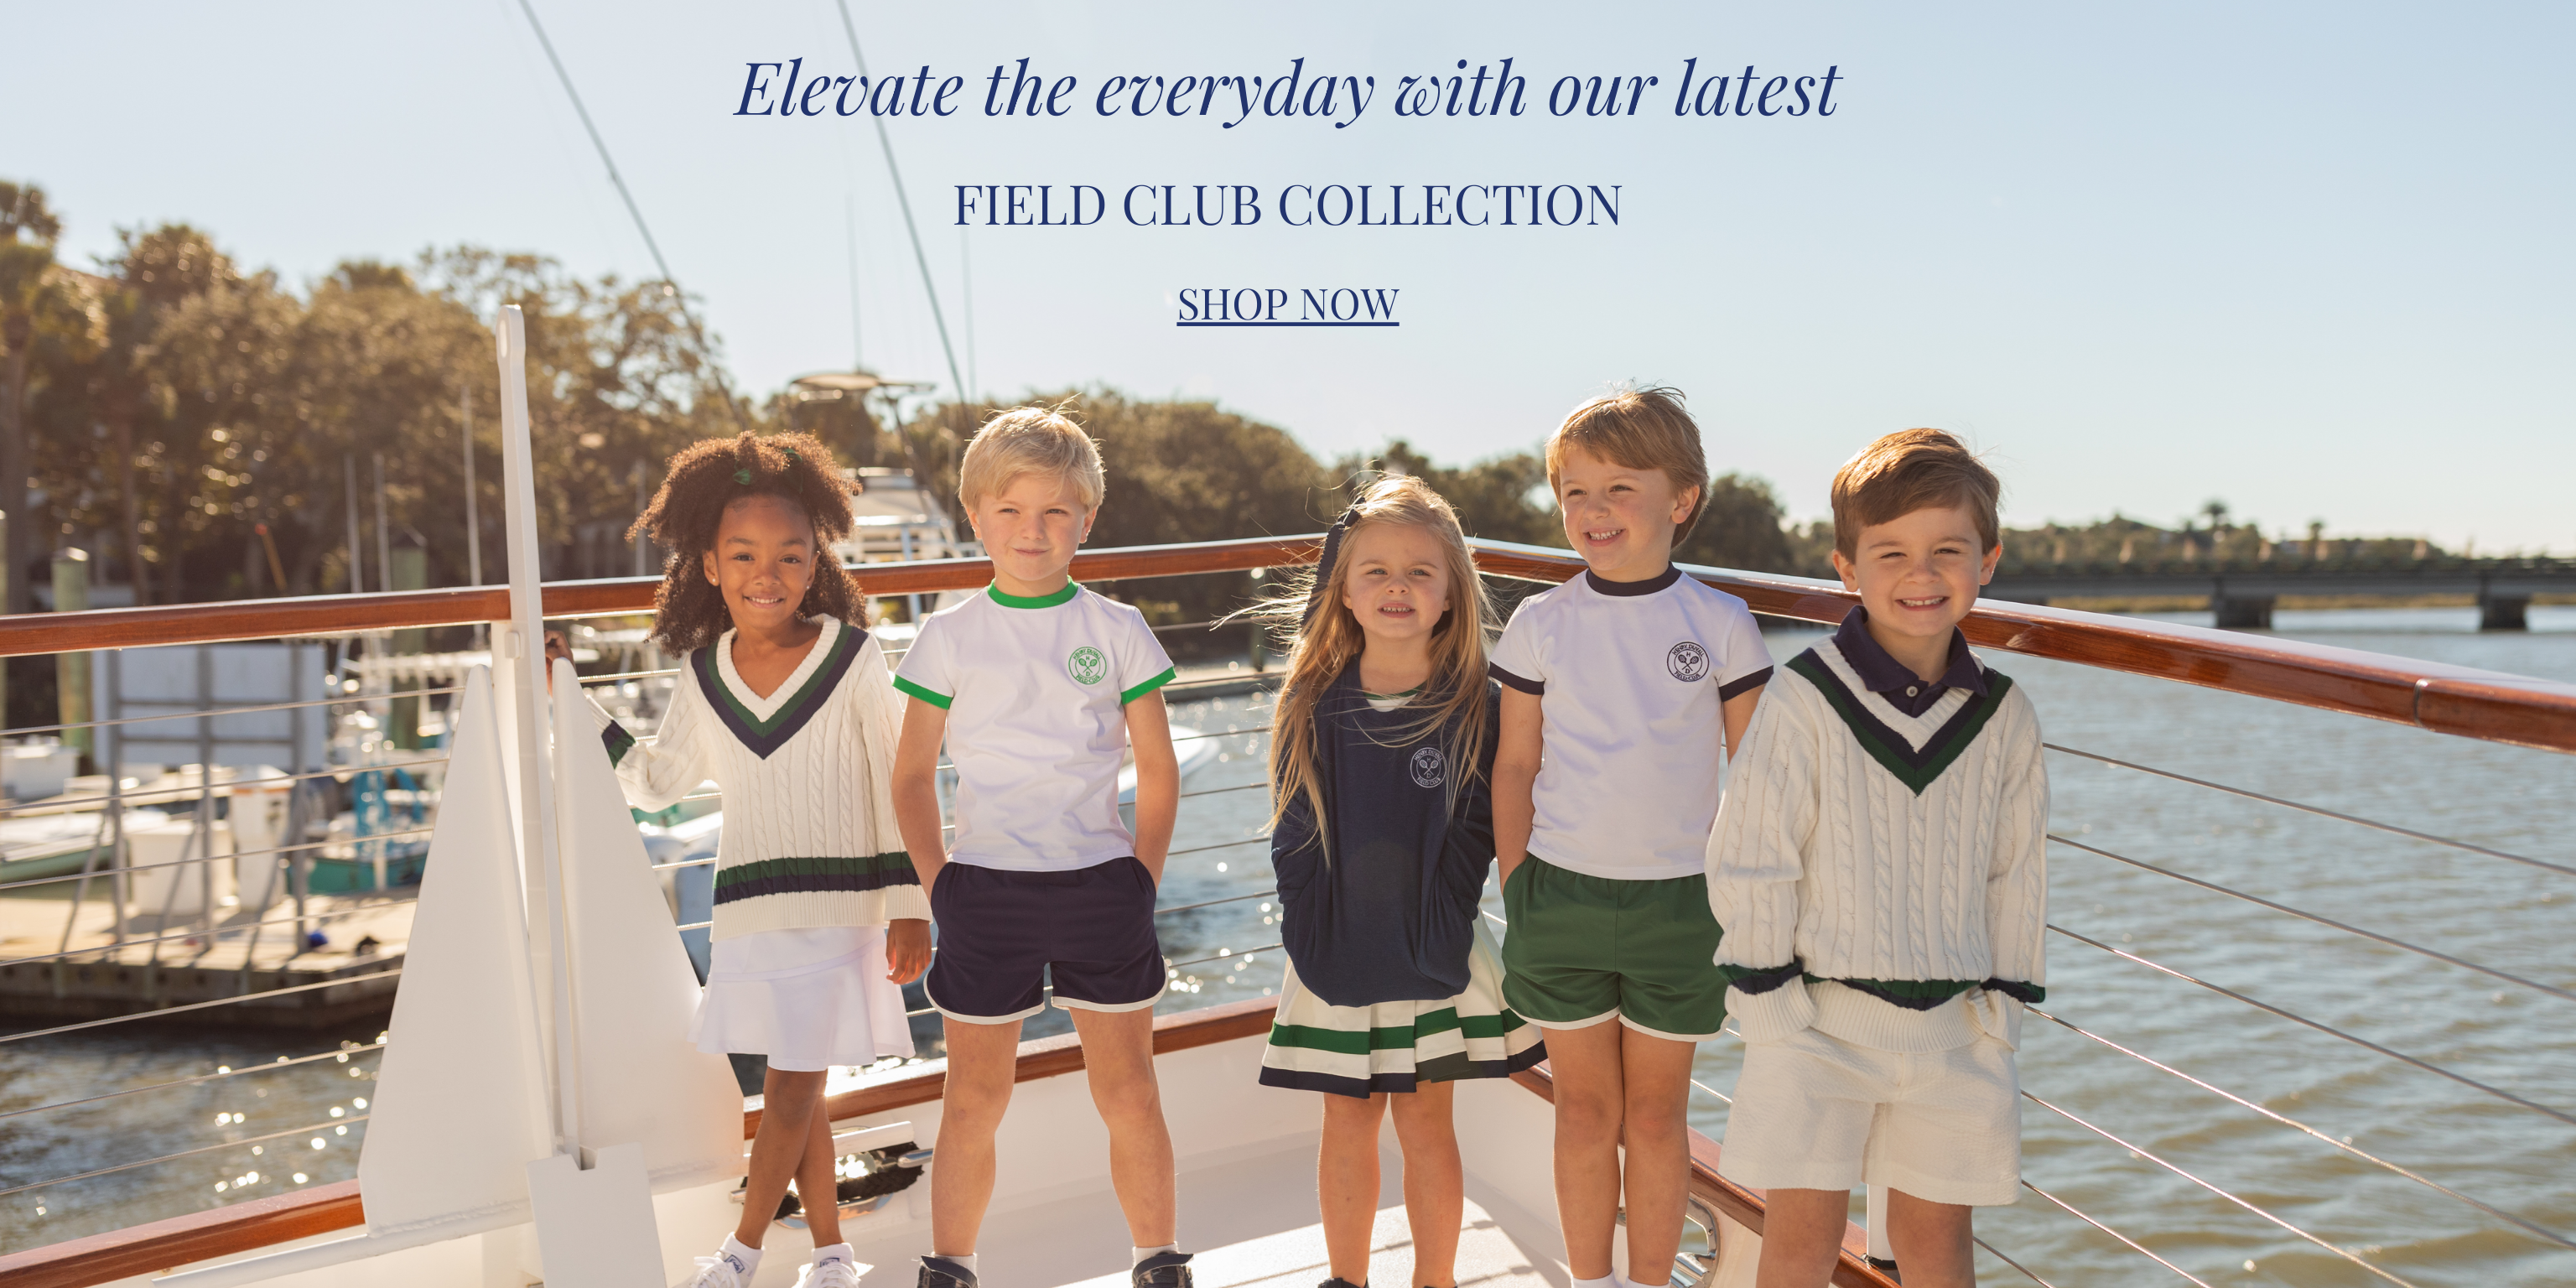 Elevate the everyday with our latest Field Club Collection